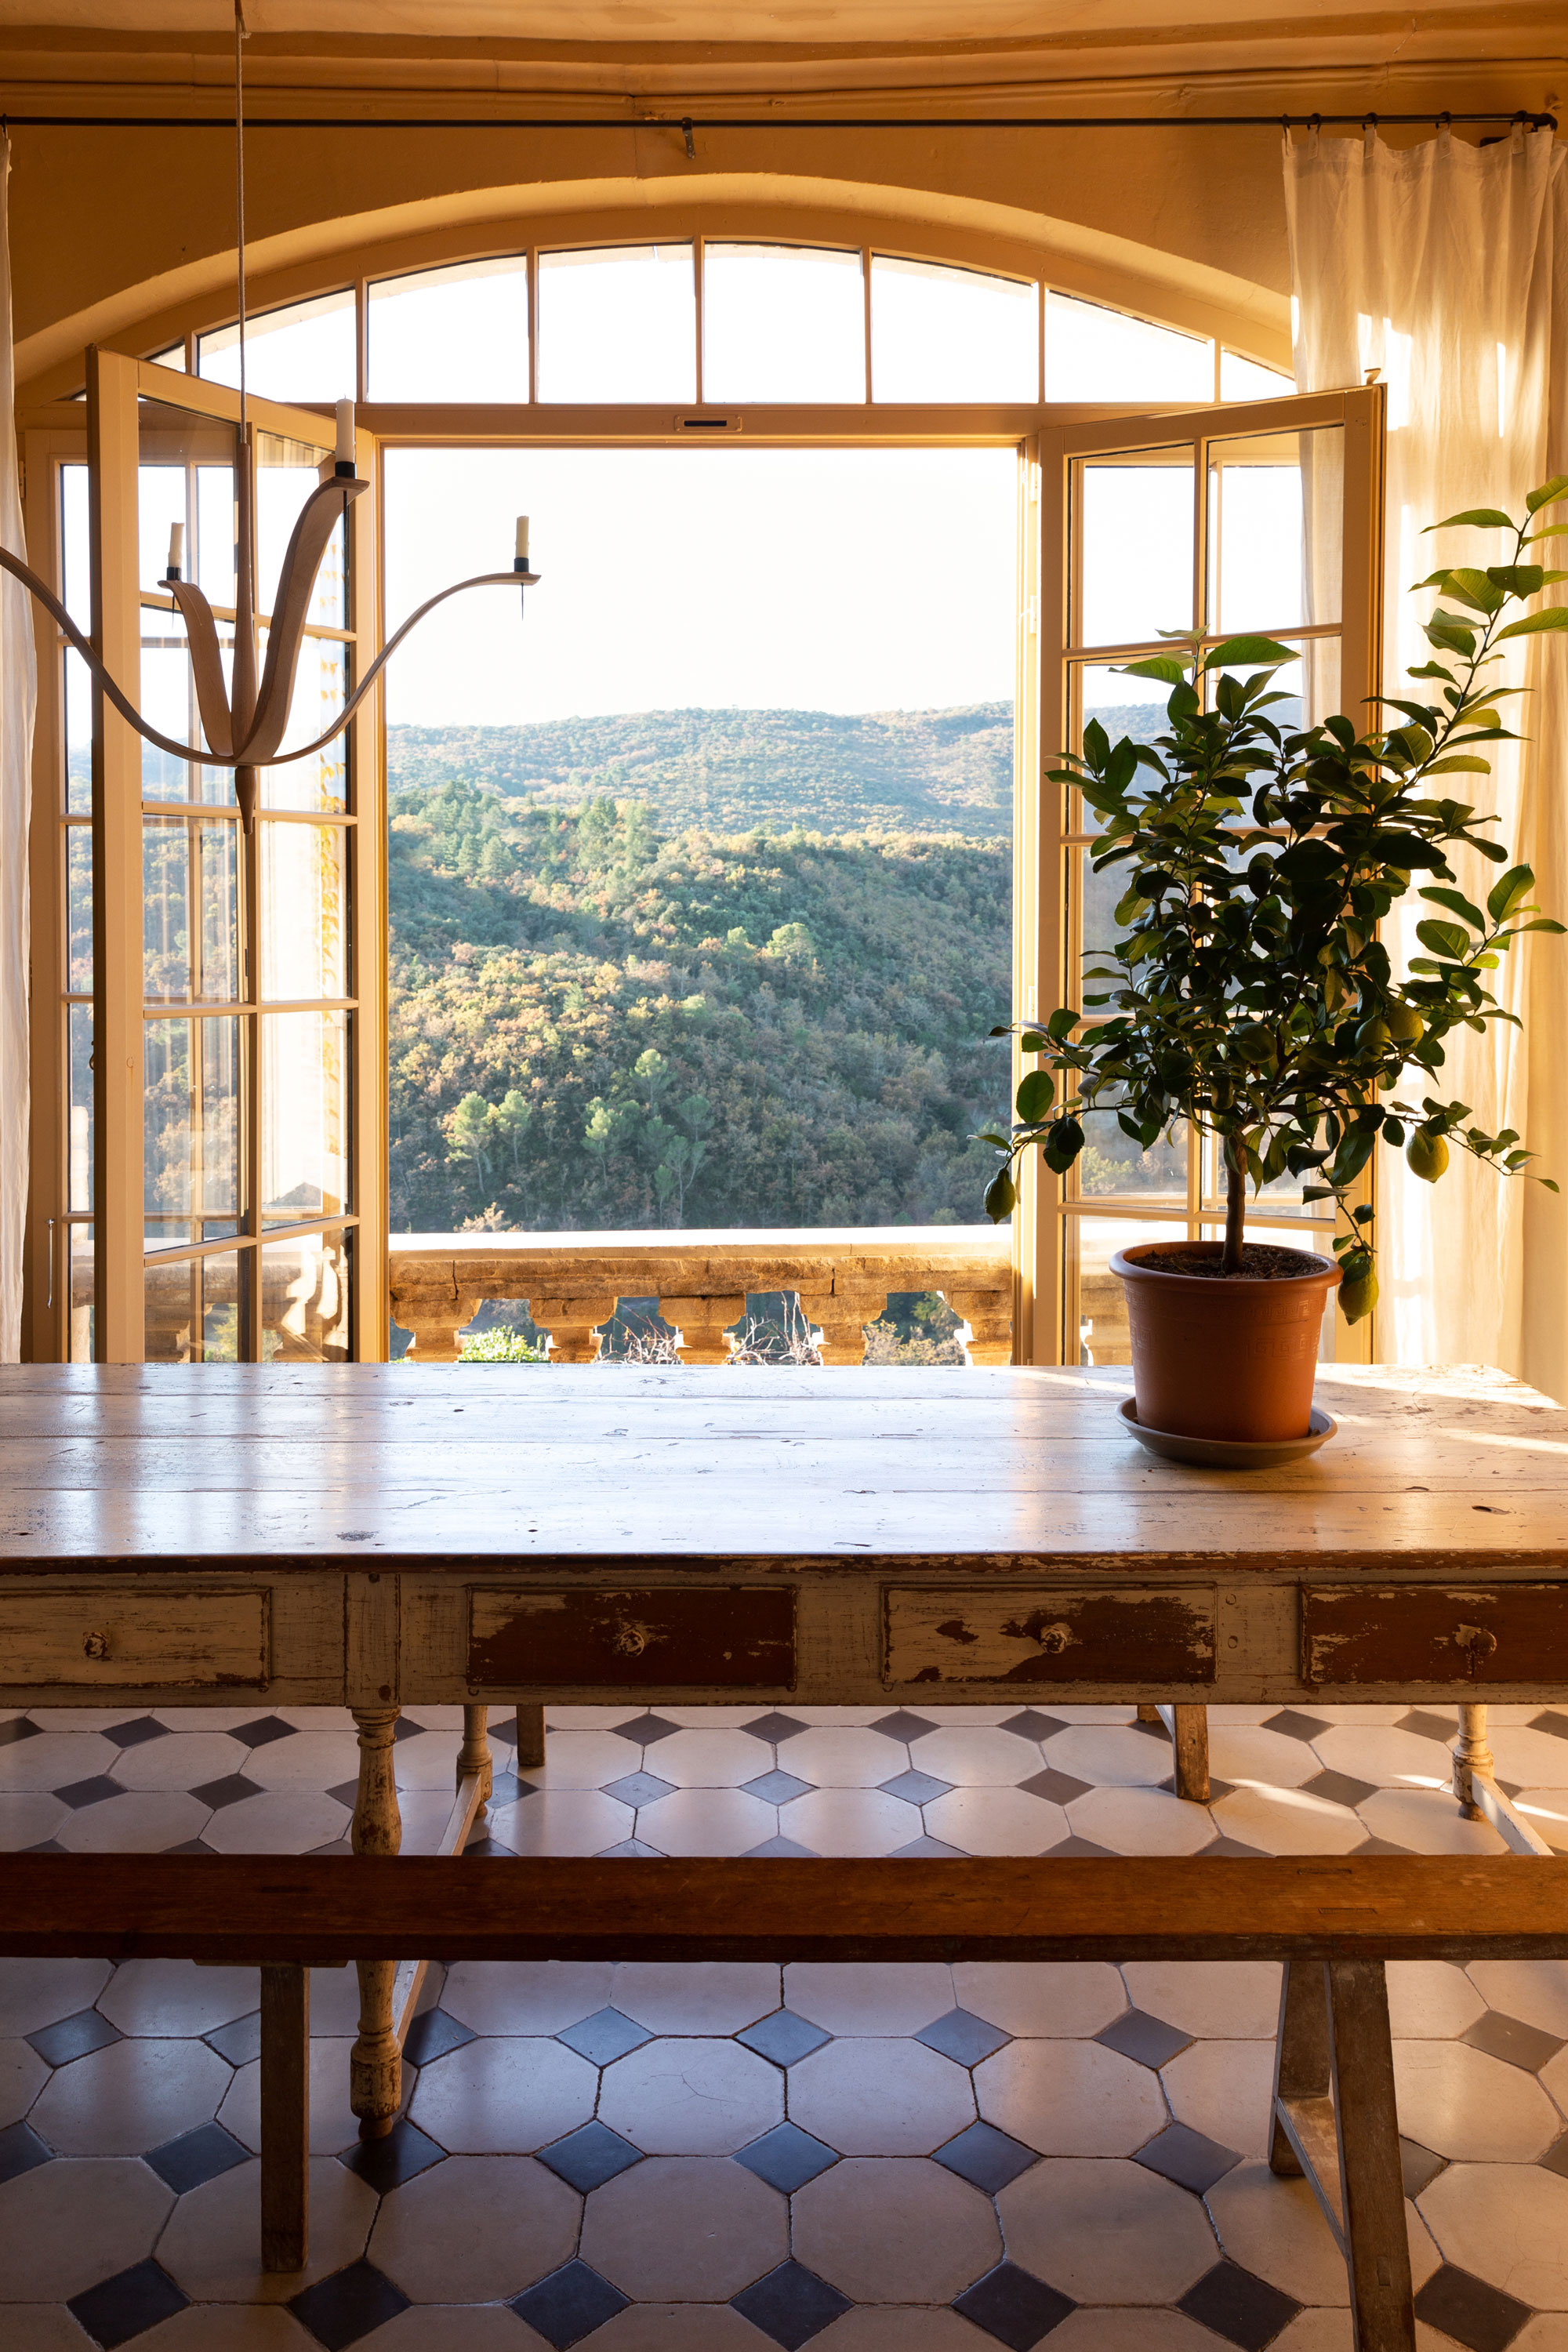 Looking out on the forests of the Luberon, Sharon and Paul’s Bonnieux apartment is one of several created centuries ago by splitting up a regal country home. Many were constructed during the 14th century, when Pope Clement V, a Frenchman, moved the …